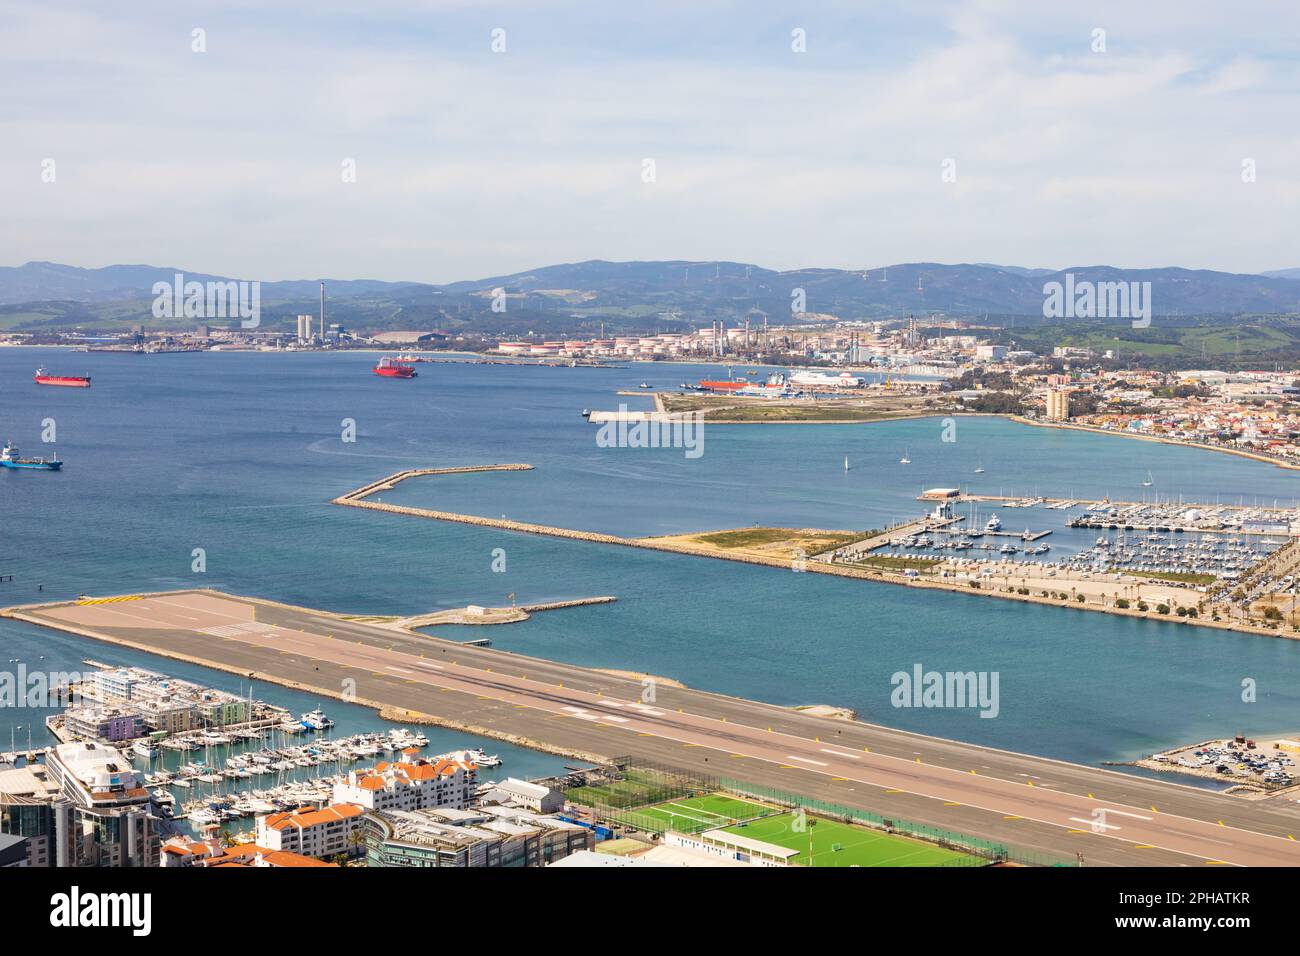 Gibraltar airport runway extending into the sea. The British Overseas Territory of Gibraltar, the Rock of Gibraltar on the Iberian Peninsula. Stock Photo